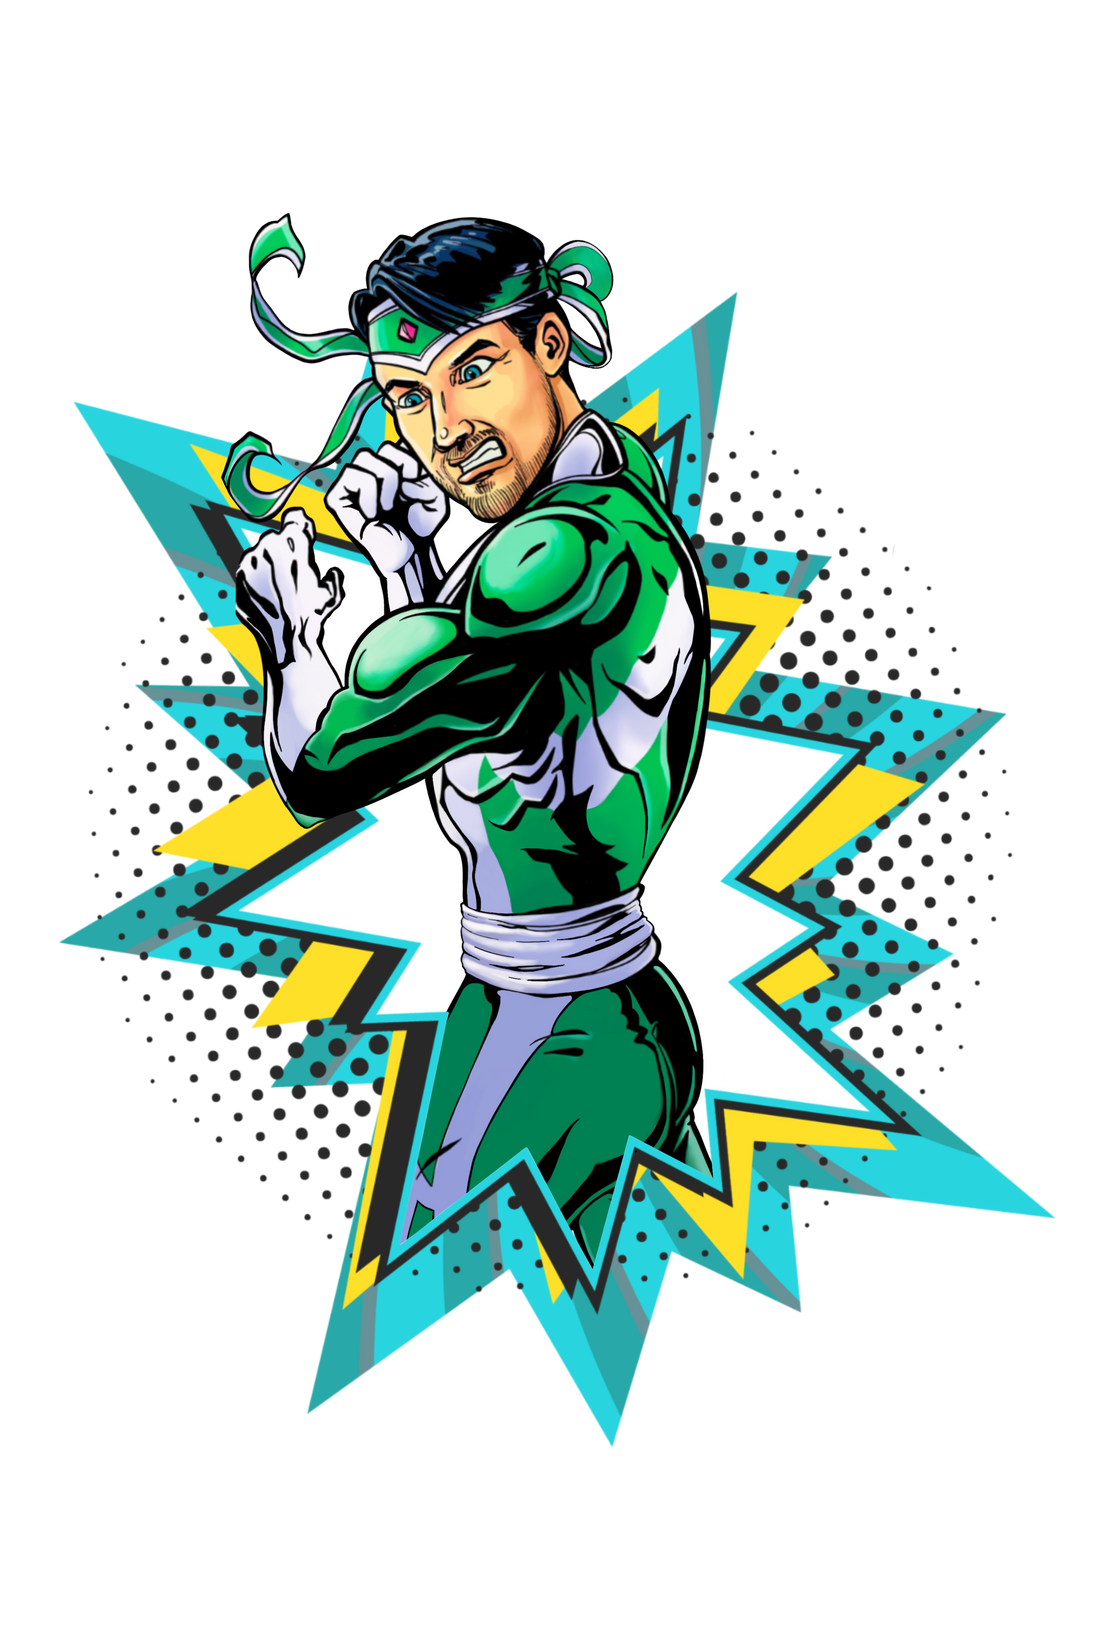  Comic book style superhero man in green, symbolizes one of the doctors fighting cancer